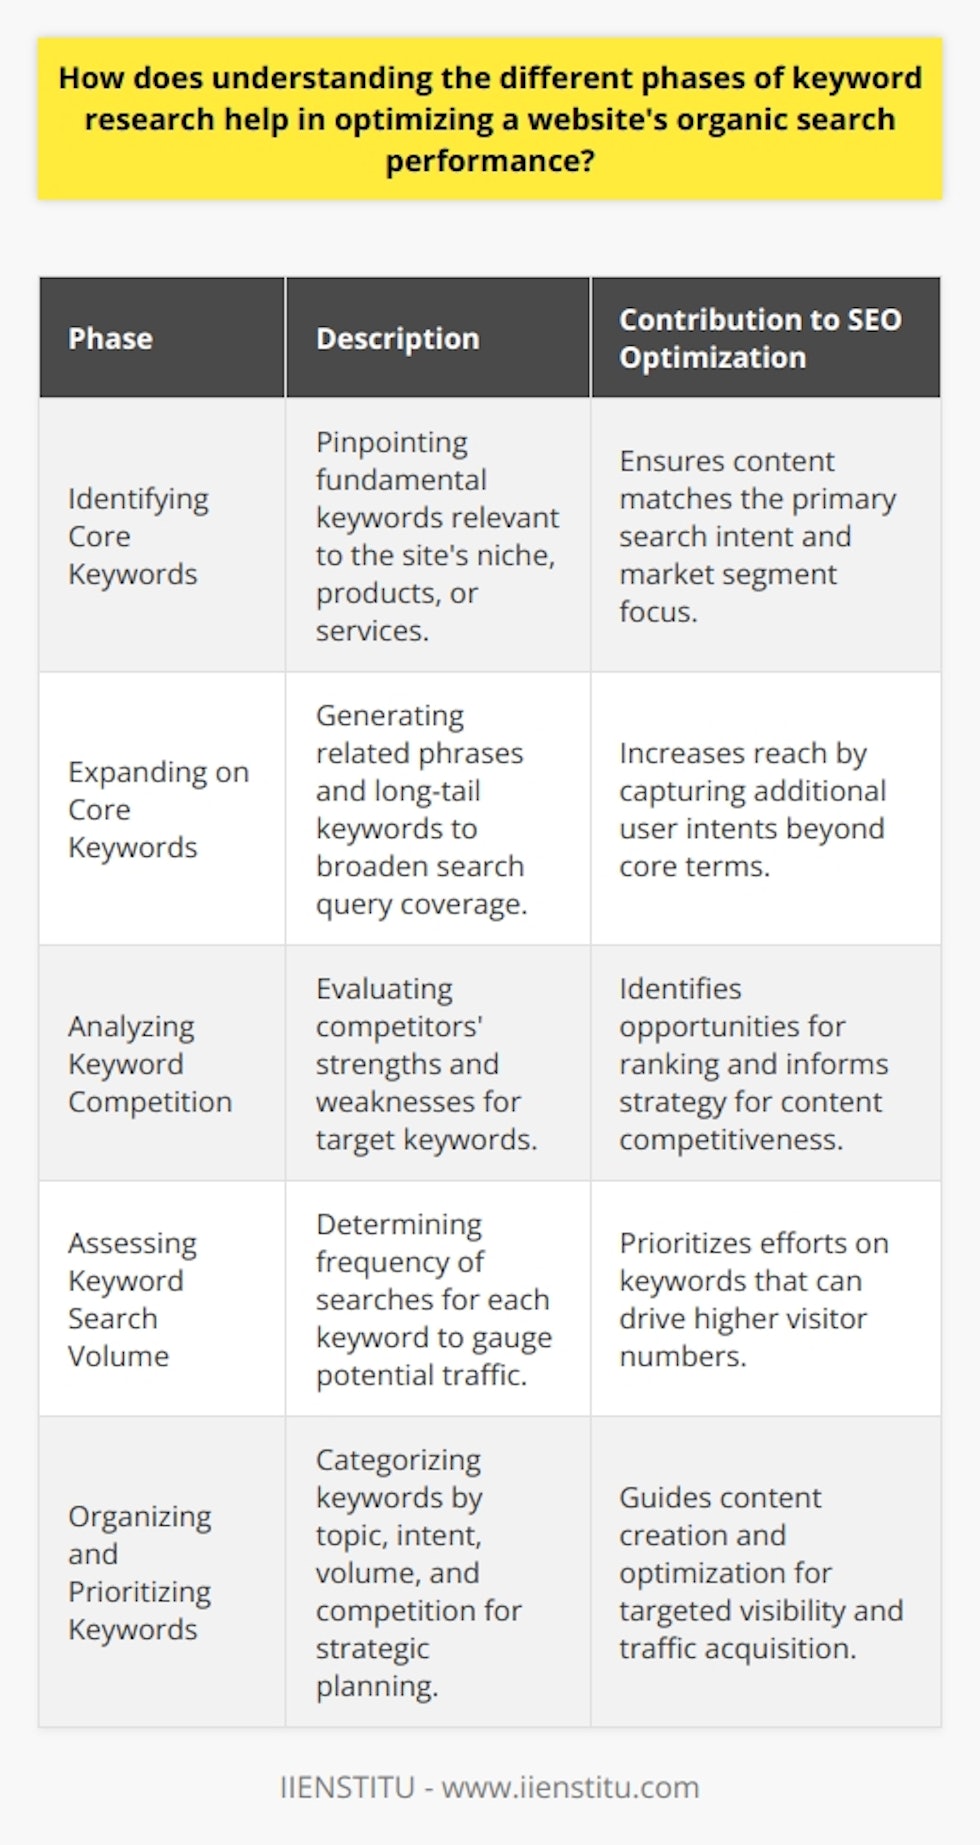 Understanding the different phases of keyword research is instrumental for improving a website's organic search performance because it aligns website content with user search intent and competitive positioning. Below is an overview of these phases and how each contributes to SEO optimization.**Identifying Core Keywords**The process begins by identifying core keywords, which are fundamentally related to the website's niche, products, or services. These are broad terms that define the primary focus and are likely the starting point for most users when initiating a search. By pinpointing the core keywords, you provide a clear topical focus that ensures your website's content targets the right market segment and addresses primary user intents.**Expanding on Core Keywords**Once core keywords are established, the expansion phase involves brainstorming and utilizing various tools to generate a list of related phrases and long-tail keywords. This expansion serves to cover a broader range of search queries. Expanding on core keywords also helps to capture additional user intents that may not be covered by the more general core terms, thus increasing the website's reach.**Analyzing Keyword Competition**Understanding the level of competition for each keyword is crucial. This phase involves evaluating the strength and weaknesses of competing websites that rank for your target keywords. Lower competition keywords may provide opportunities for quicker wins, particularly for newer or smaller websites. Conversely, high competition keywords may require more strategic, high-quality content and a more robust SEO effort to achieve rankings.**Assessing Keyword Search Volume**It's not enough to have a list of relevant keywords; these keywords must also have sufficient search volume to drive traffic. In this phase, keywords are evaluated based on how often they are searched for in search engines. This information is crucial for prioritizing efforts towards keywords that have the potential to attract more visitors.**Organizing and Prioritizing Keywords**The final phase is the strategic organization and prioritization of keywords. Using the data gathered from previous phases, keywords can be categorized by topic, search intent, search volume, and competition levels. This hierarchy helps in creating an actionable SEO roadmap, where high-priority keywords guide content creation and optimization efforts for maximum visibility and traffic.Each phase of keyword research builds upon the previous one, creating a comprehensive understanding of the website's SEO landscape. By attentively moving through each of these phases, webmasters can construct a detailed and effective SEO strategy that targets specific, relevant keywords, optimizes content to meet user search patterns, and identifies the most advantageous opportunities to pursue in the vast realm of organic search.